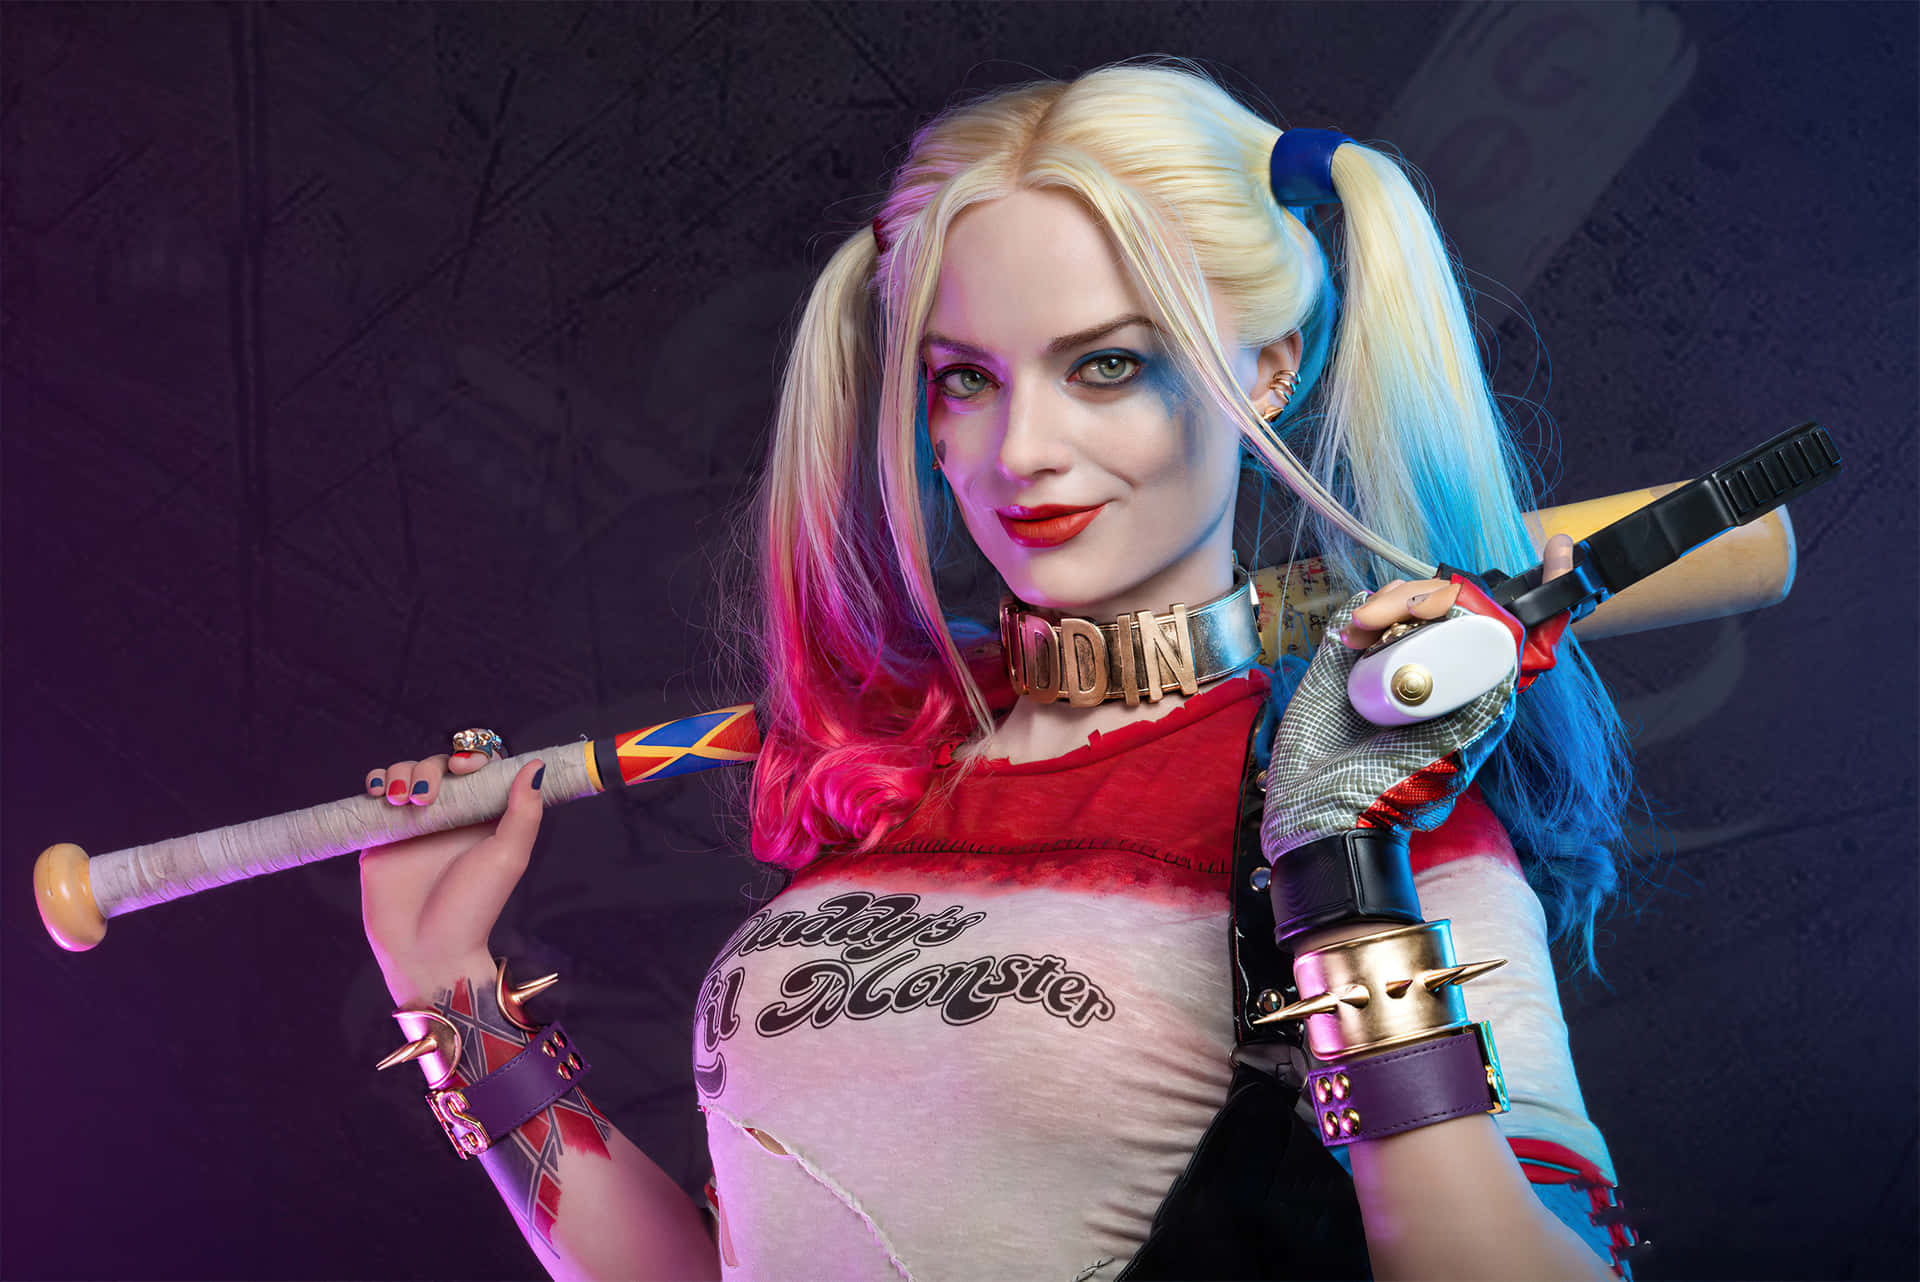 Harley Quinn Images Photos and Premium High Res Pictures - Getty Images